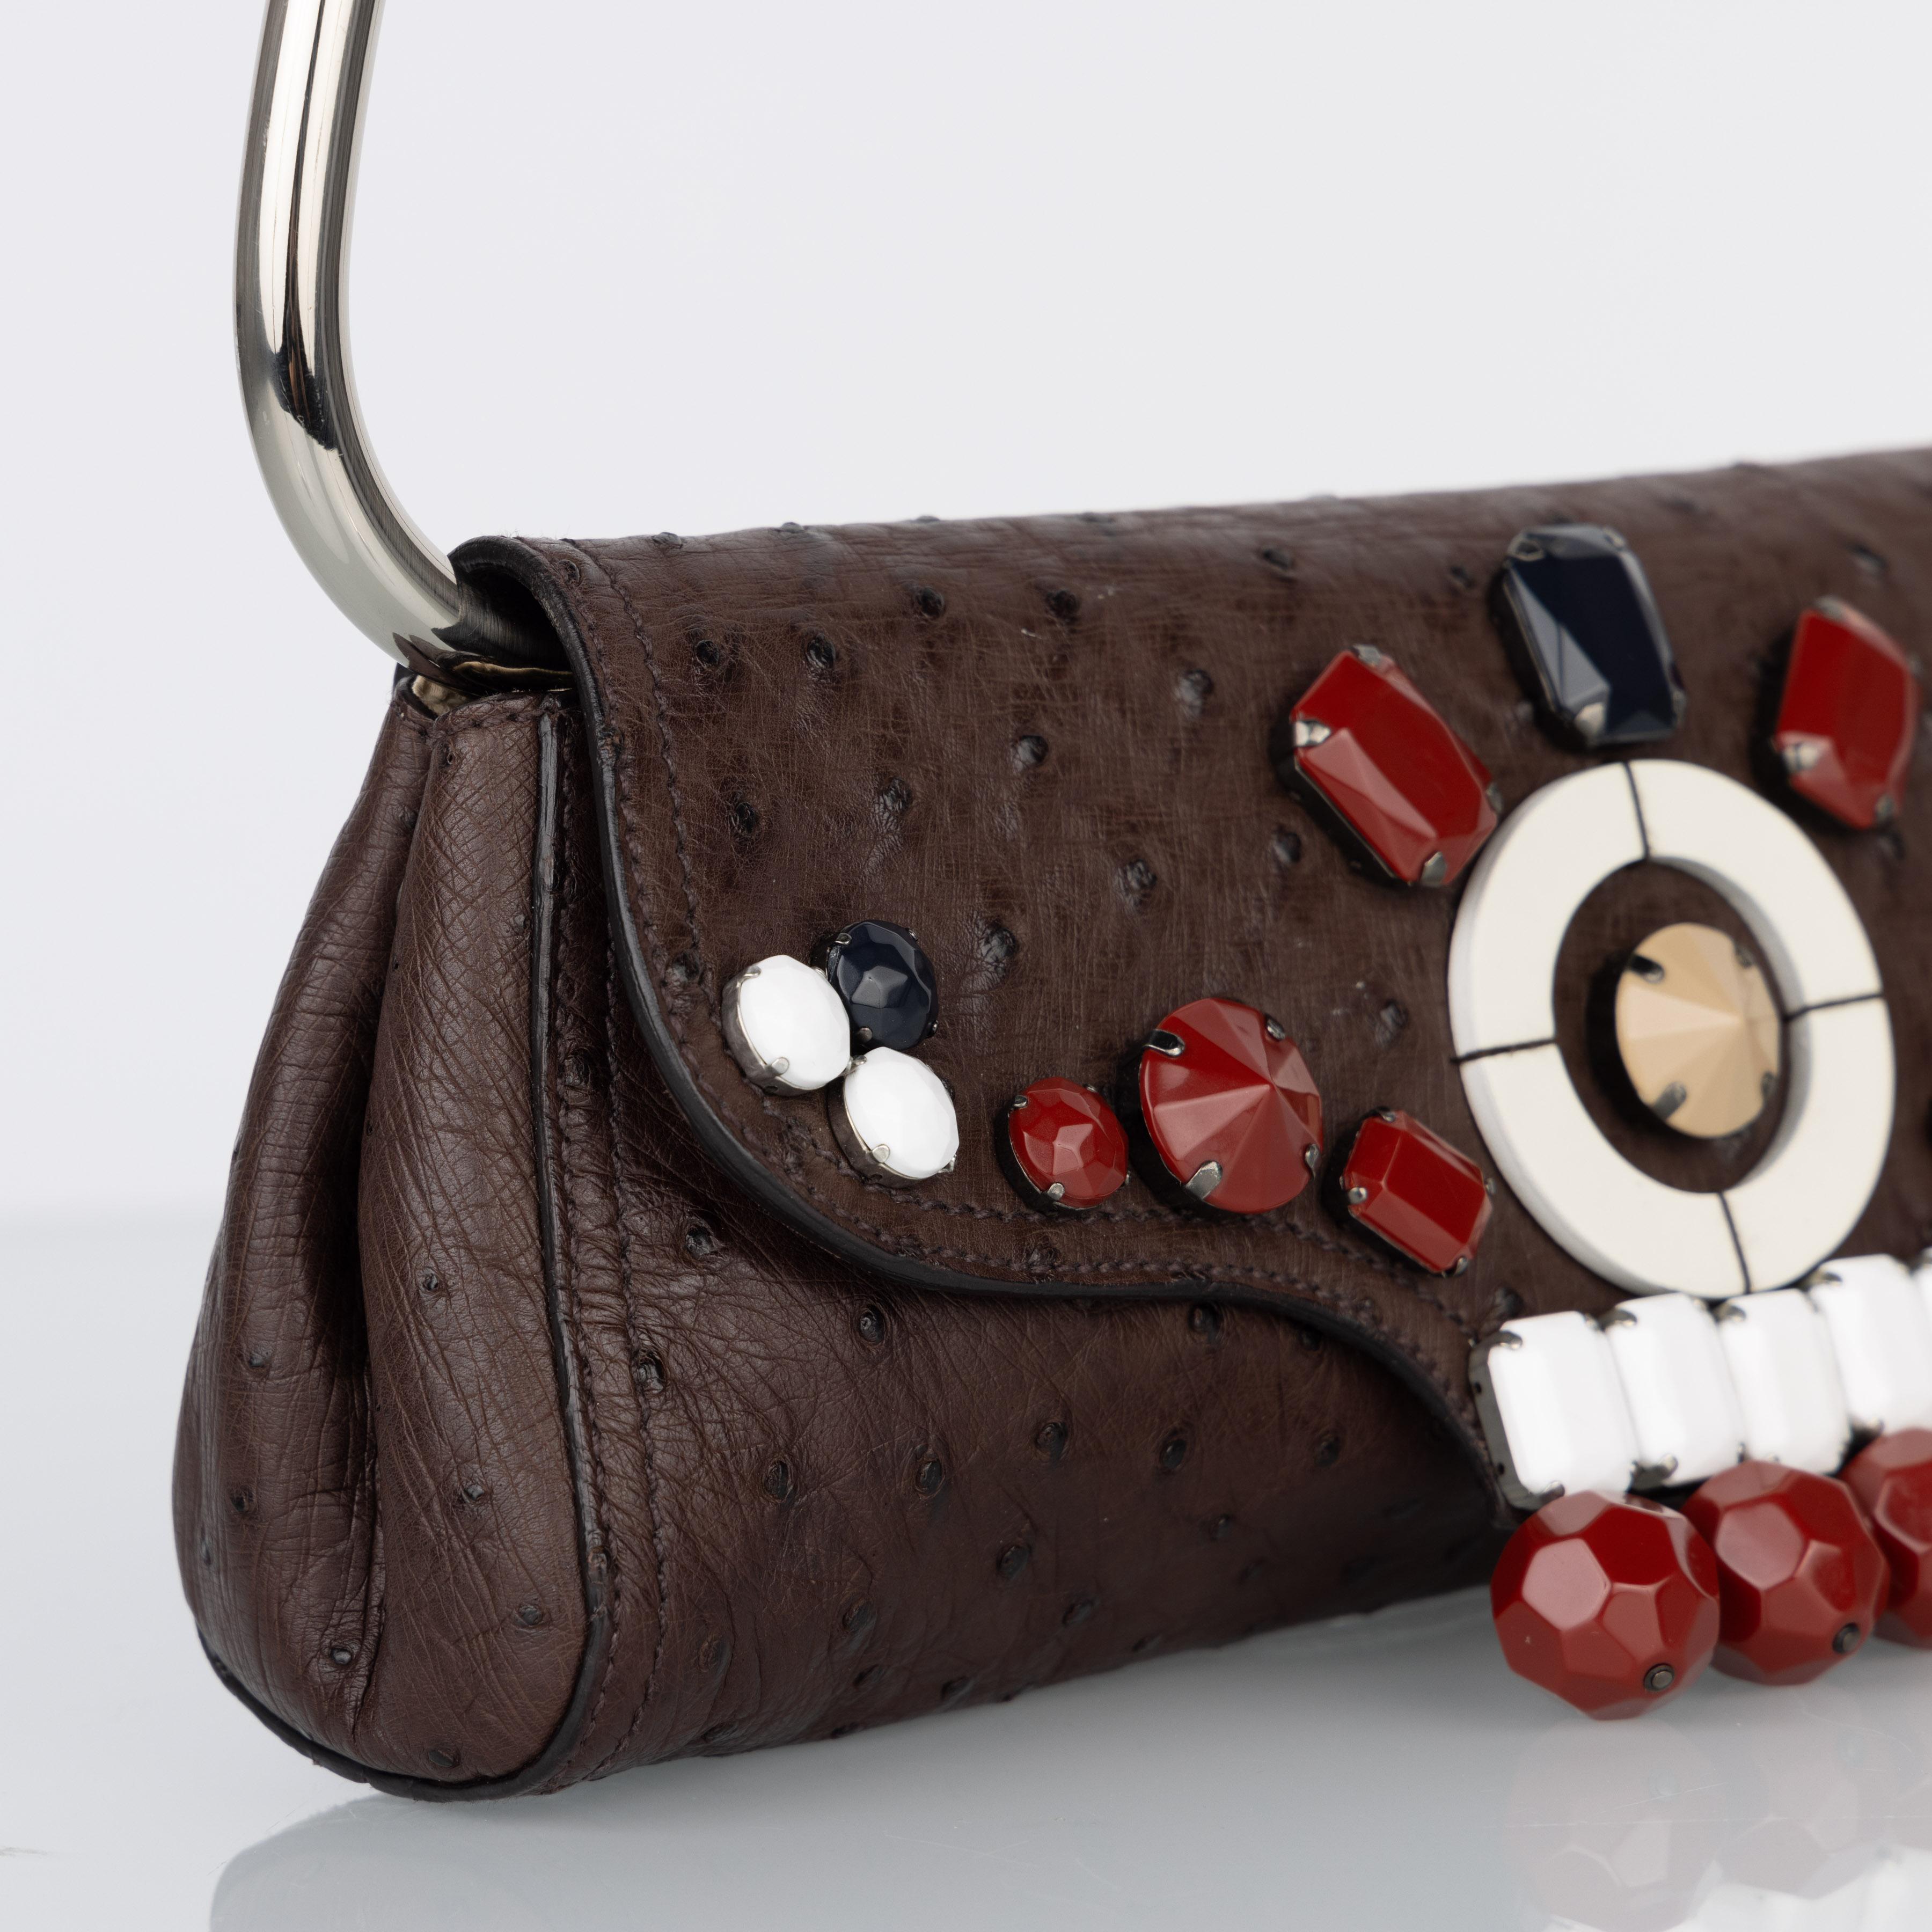 Prada Brown Ostrich Leather Jewel Embellished Swing Bag SS 2003 Archival Piece For Sale 5